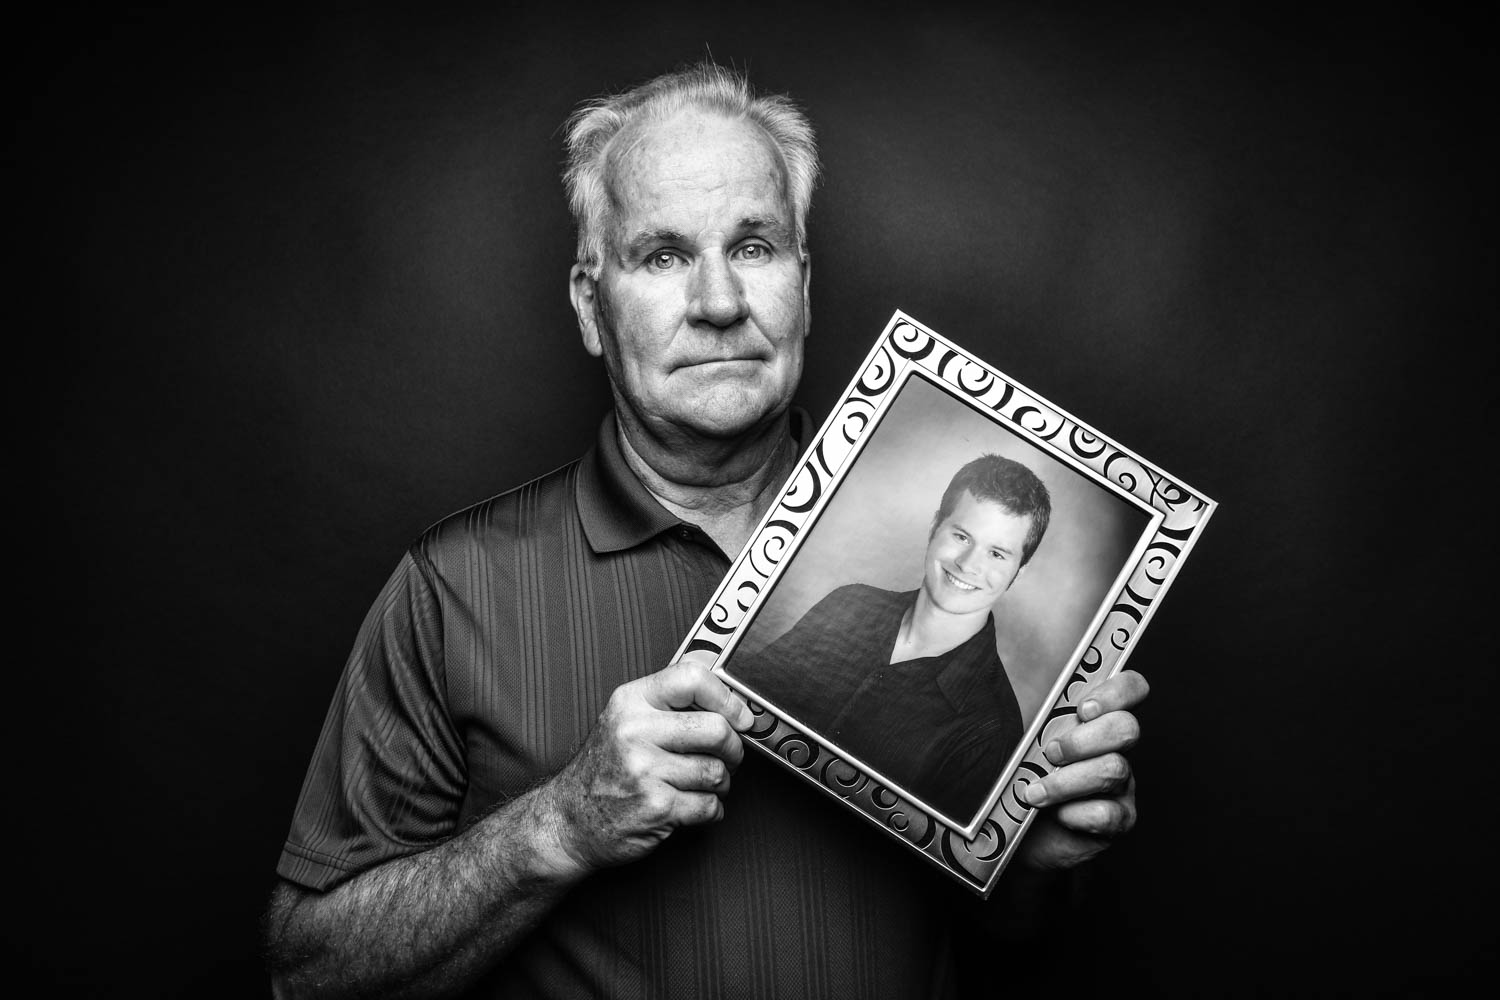 Left Behind by Suicide: Dave Hansen, Bettendorf, Iowa, poses with a photo of his son Daniel, who died by suicide, at 20, in 2005.  